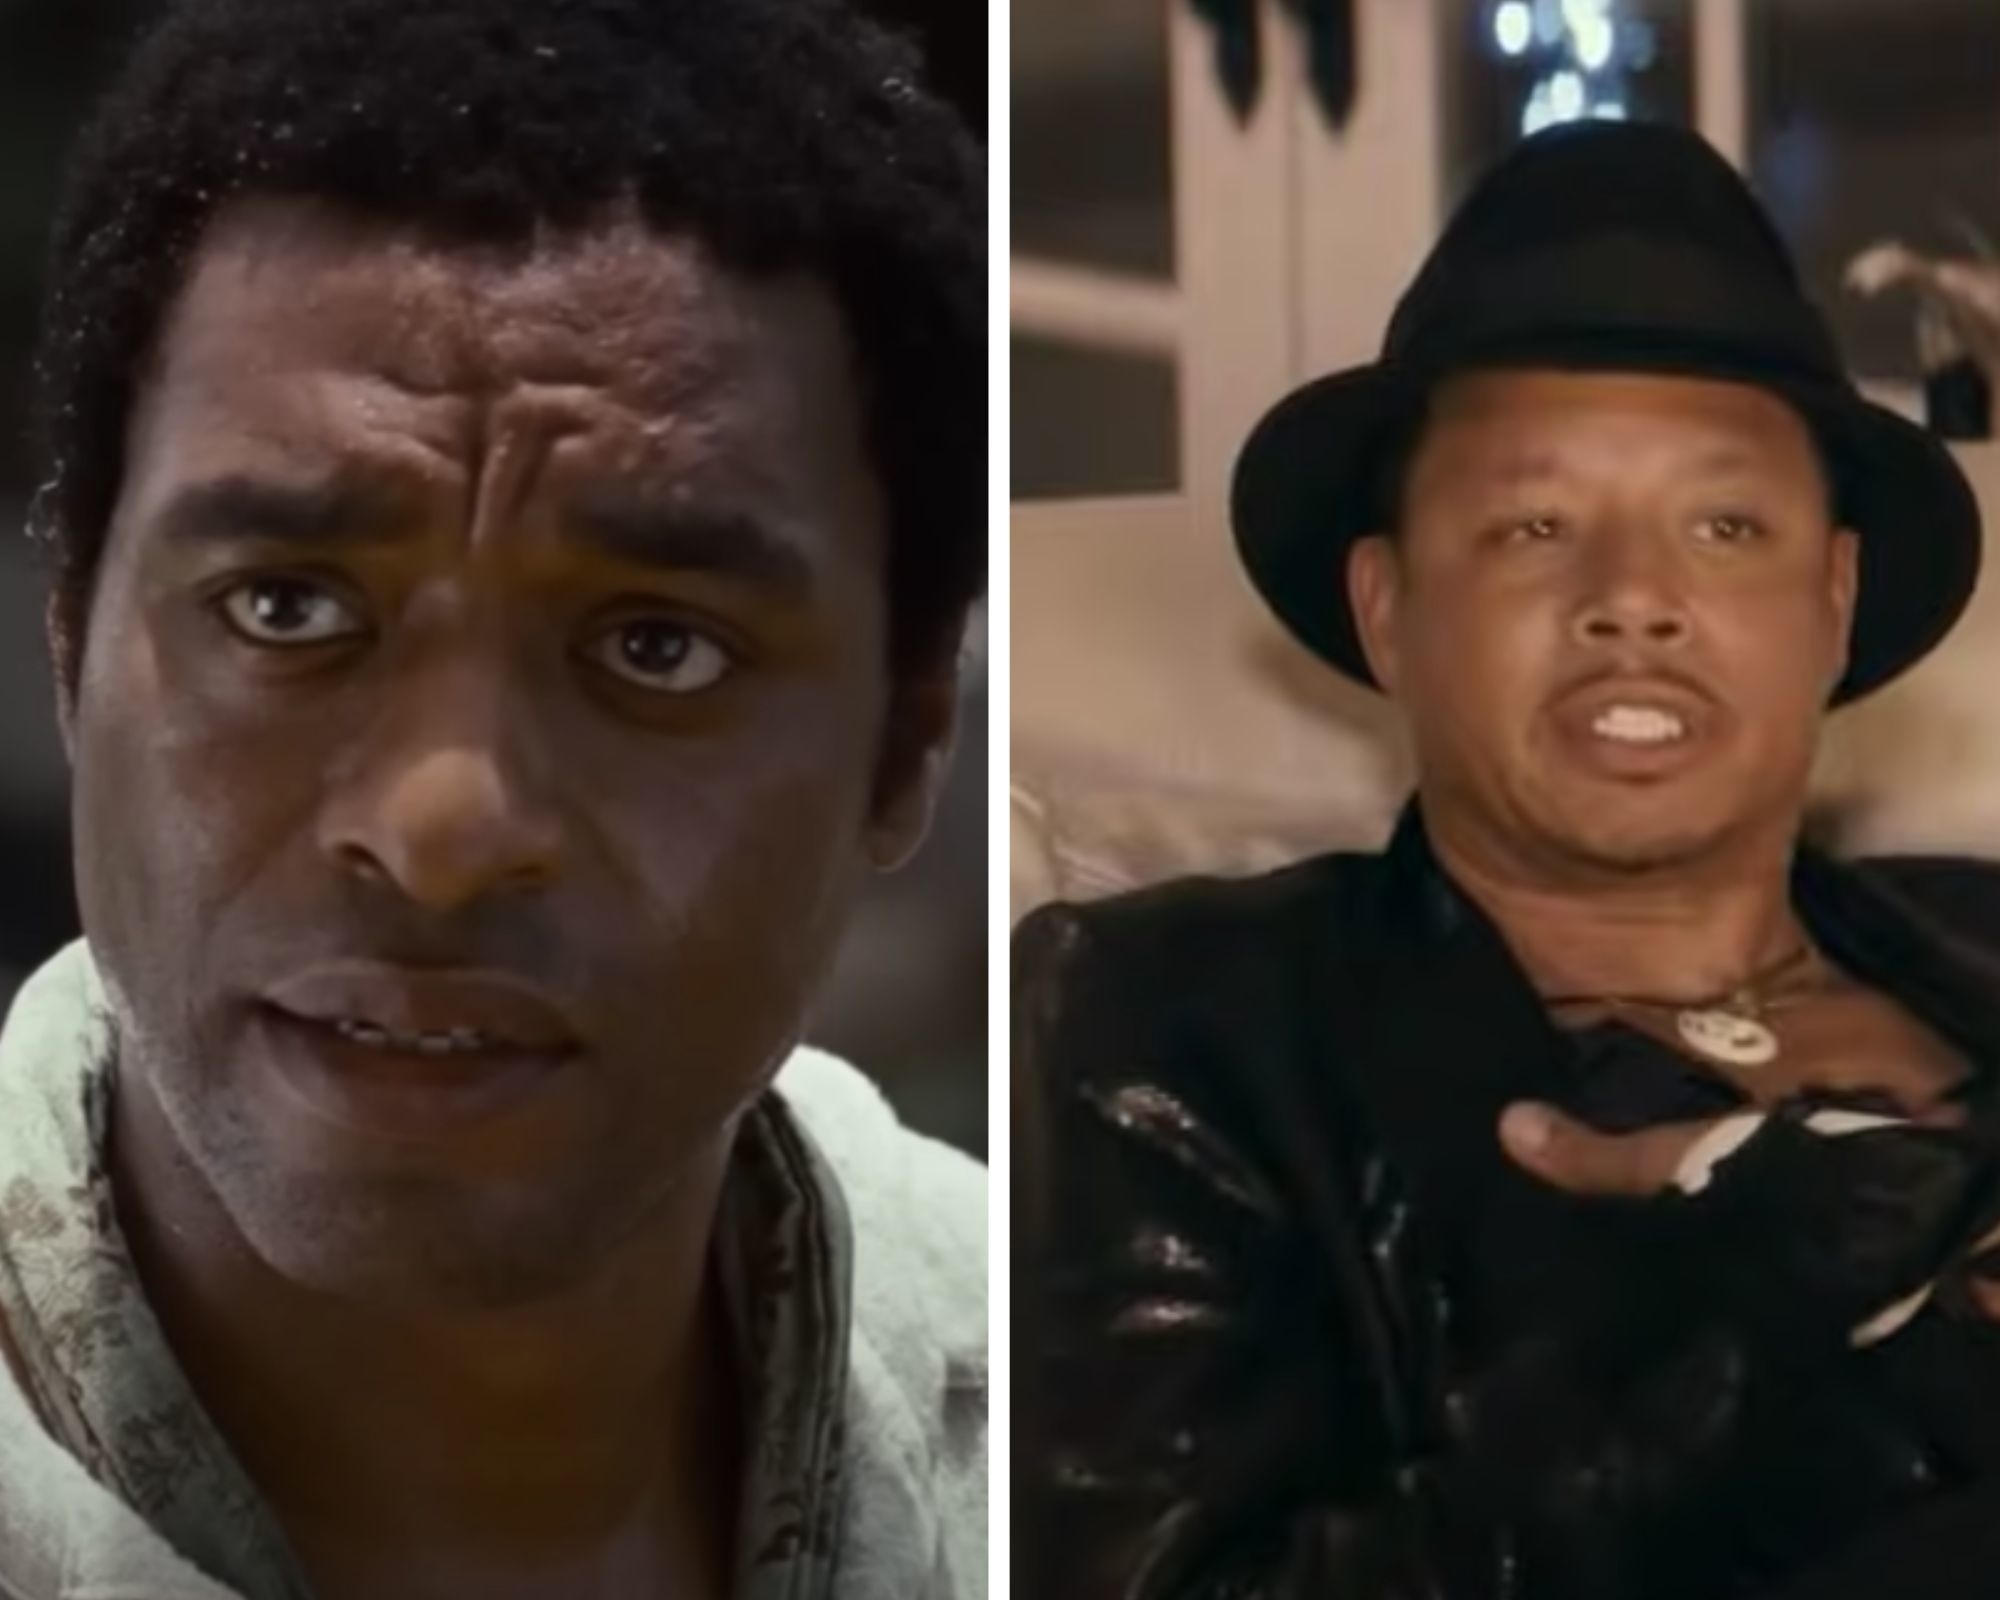 Chiwetel Ejiofor as Solomon Northup / Platt in 12 Years a Slave and Terrence Howard as Quentin &quot;Q&quot; Spivey in The Best Man Holiday